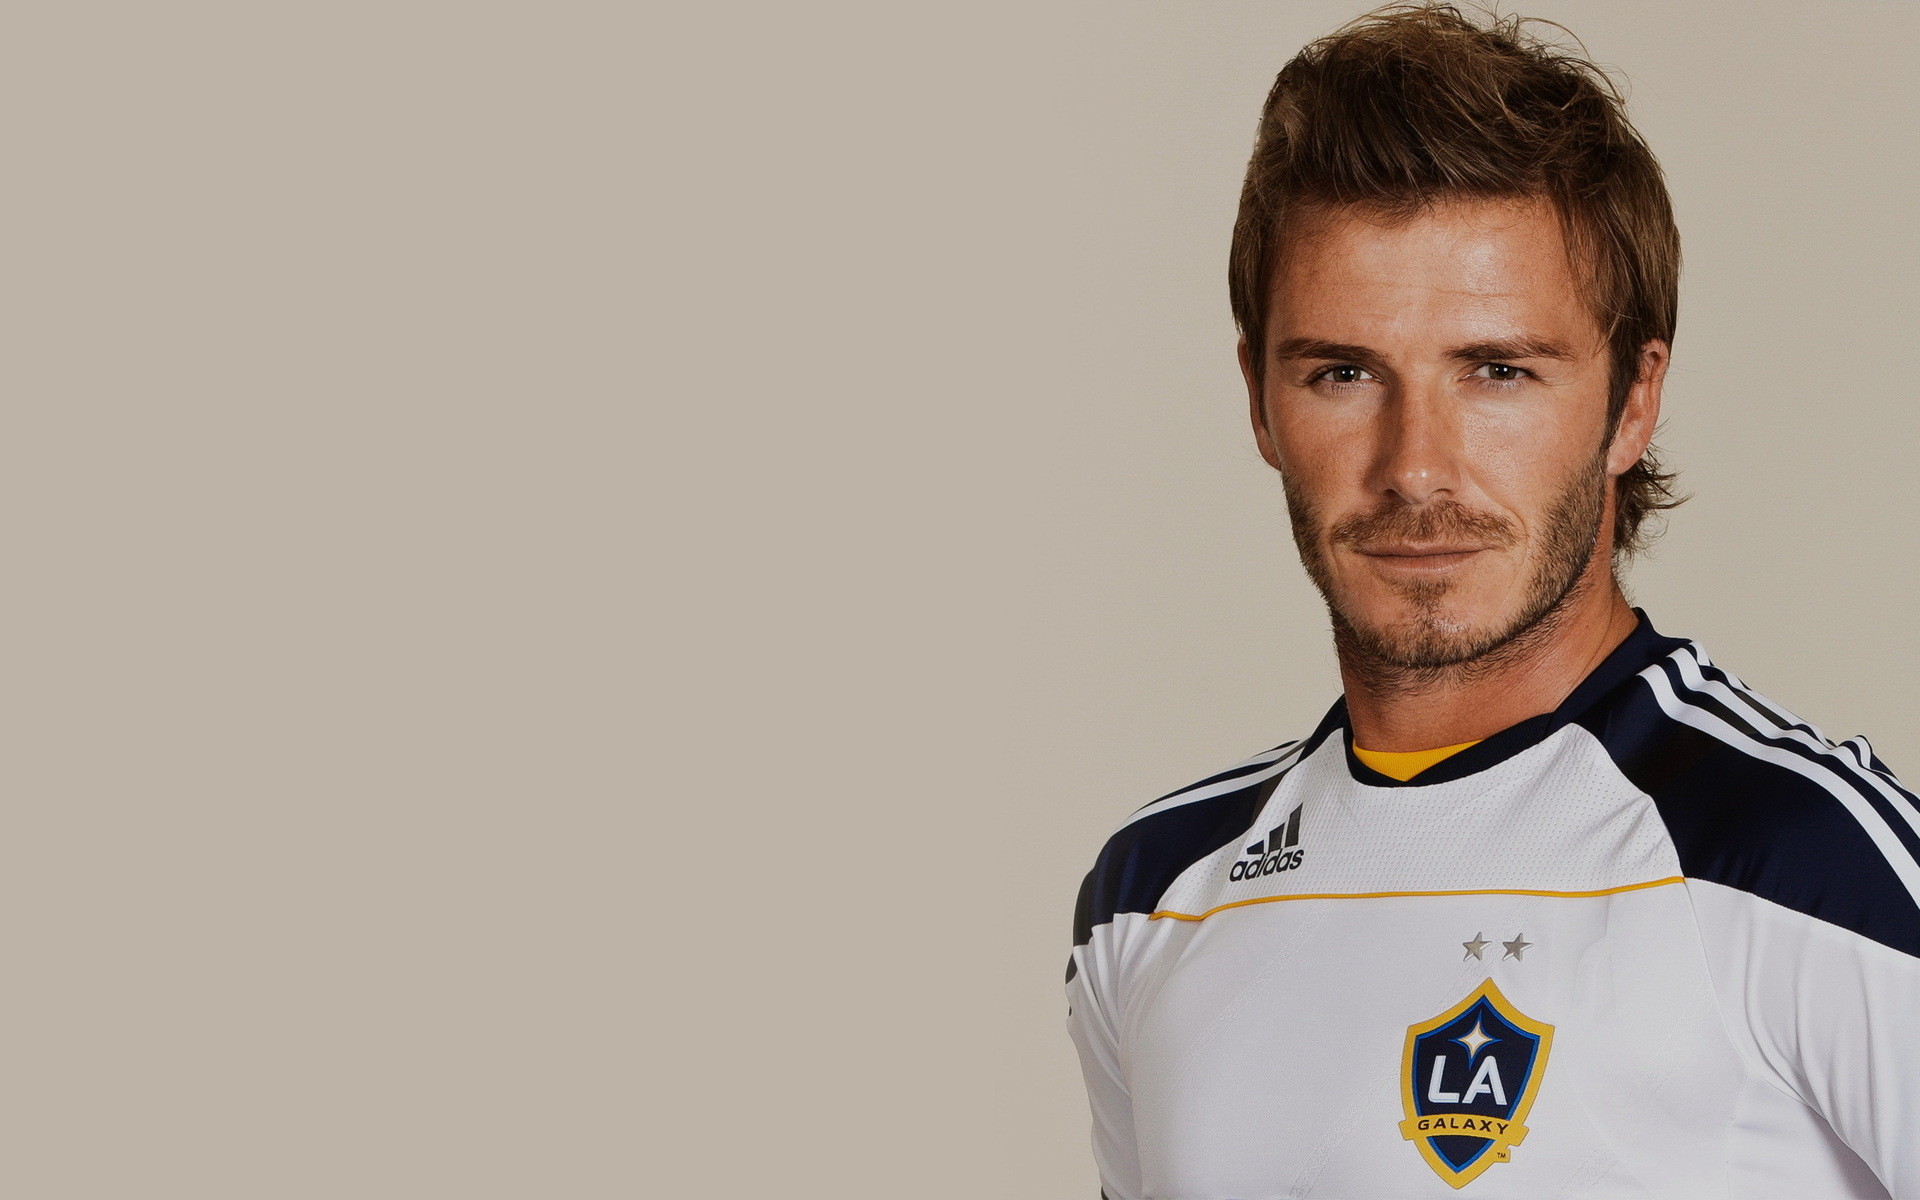 1920x1200 Wallpaper and background photos of David Beckham Cover for fans of David  Beckham images.